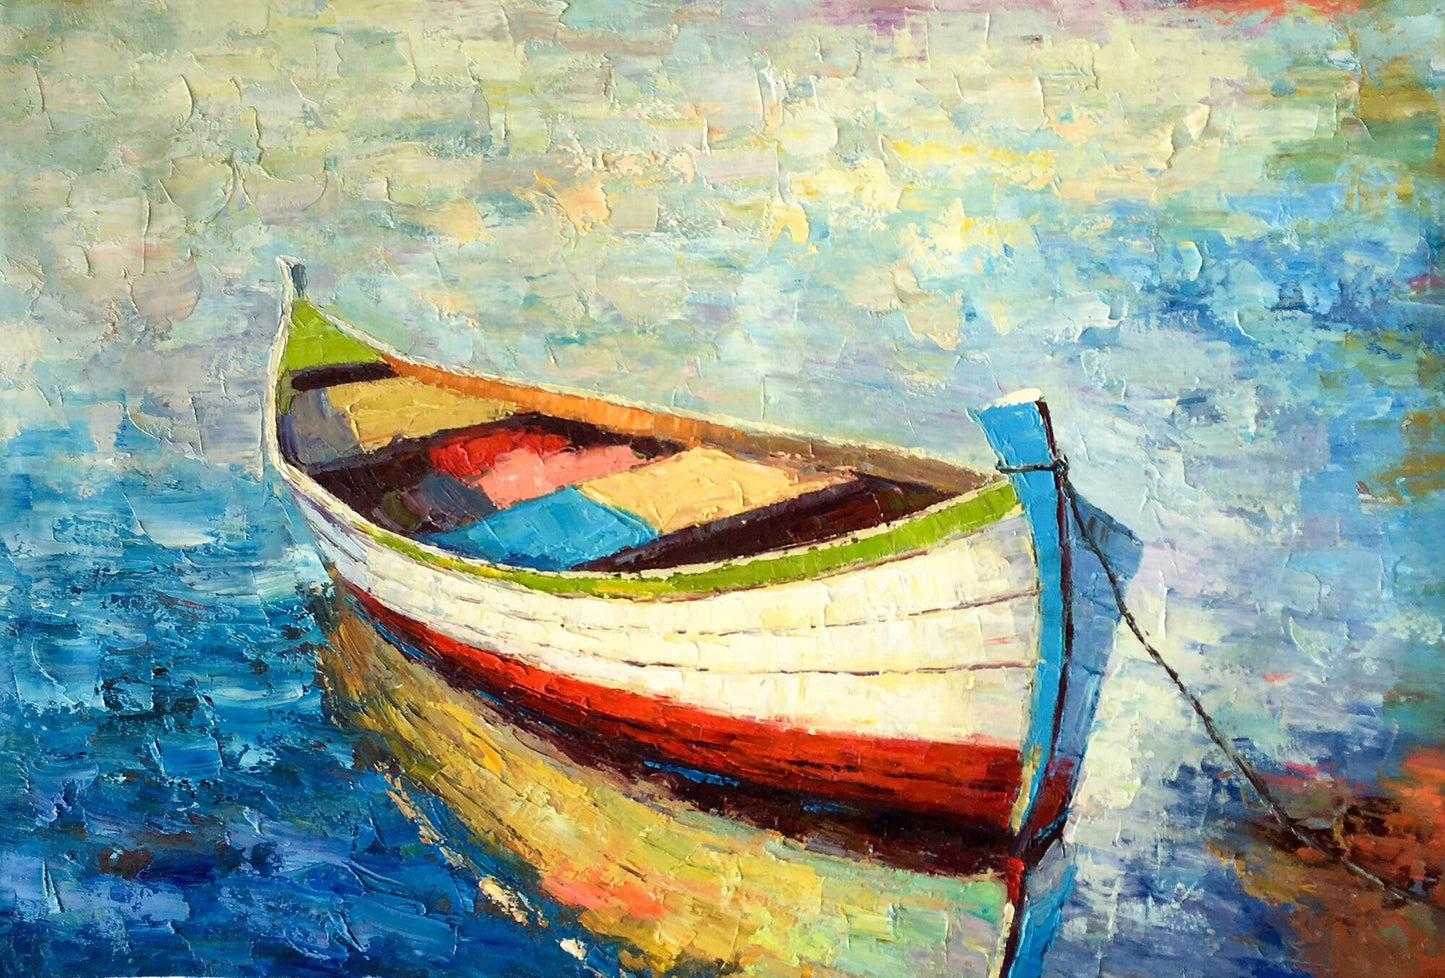 Large Oil Painting Fishing Boat Seascape Bedroom Decor, Aesthetic Room Decor, Unique Wall Art, Canvas Wall Art Abstract, Oil Painting Blue